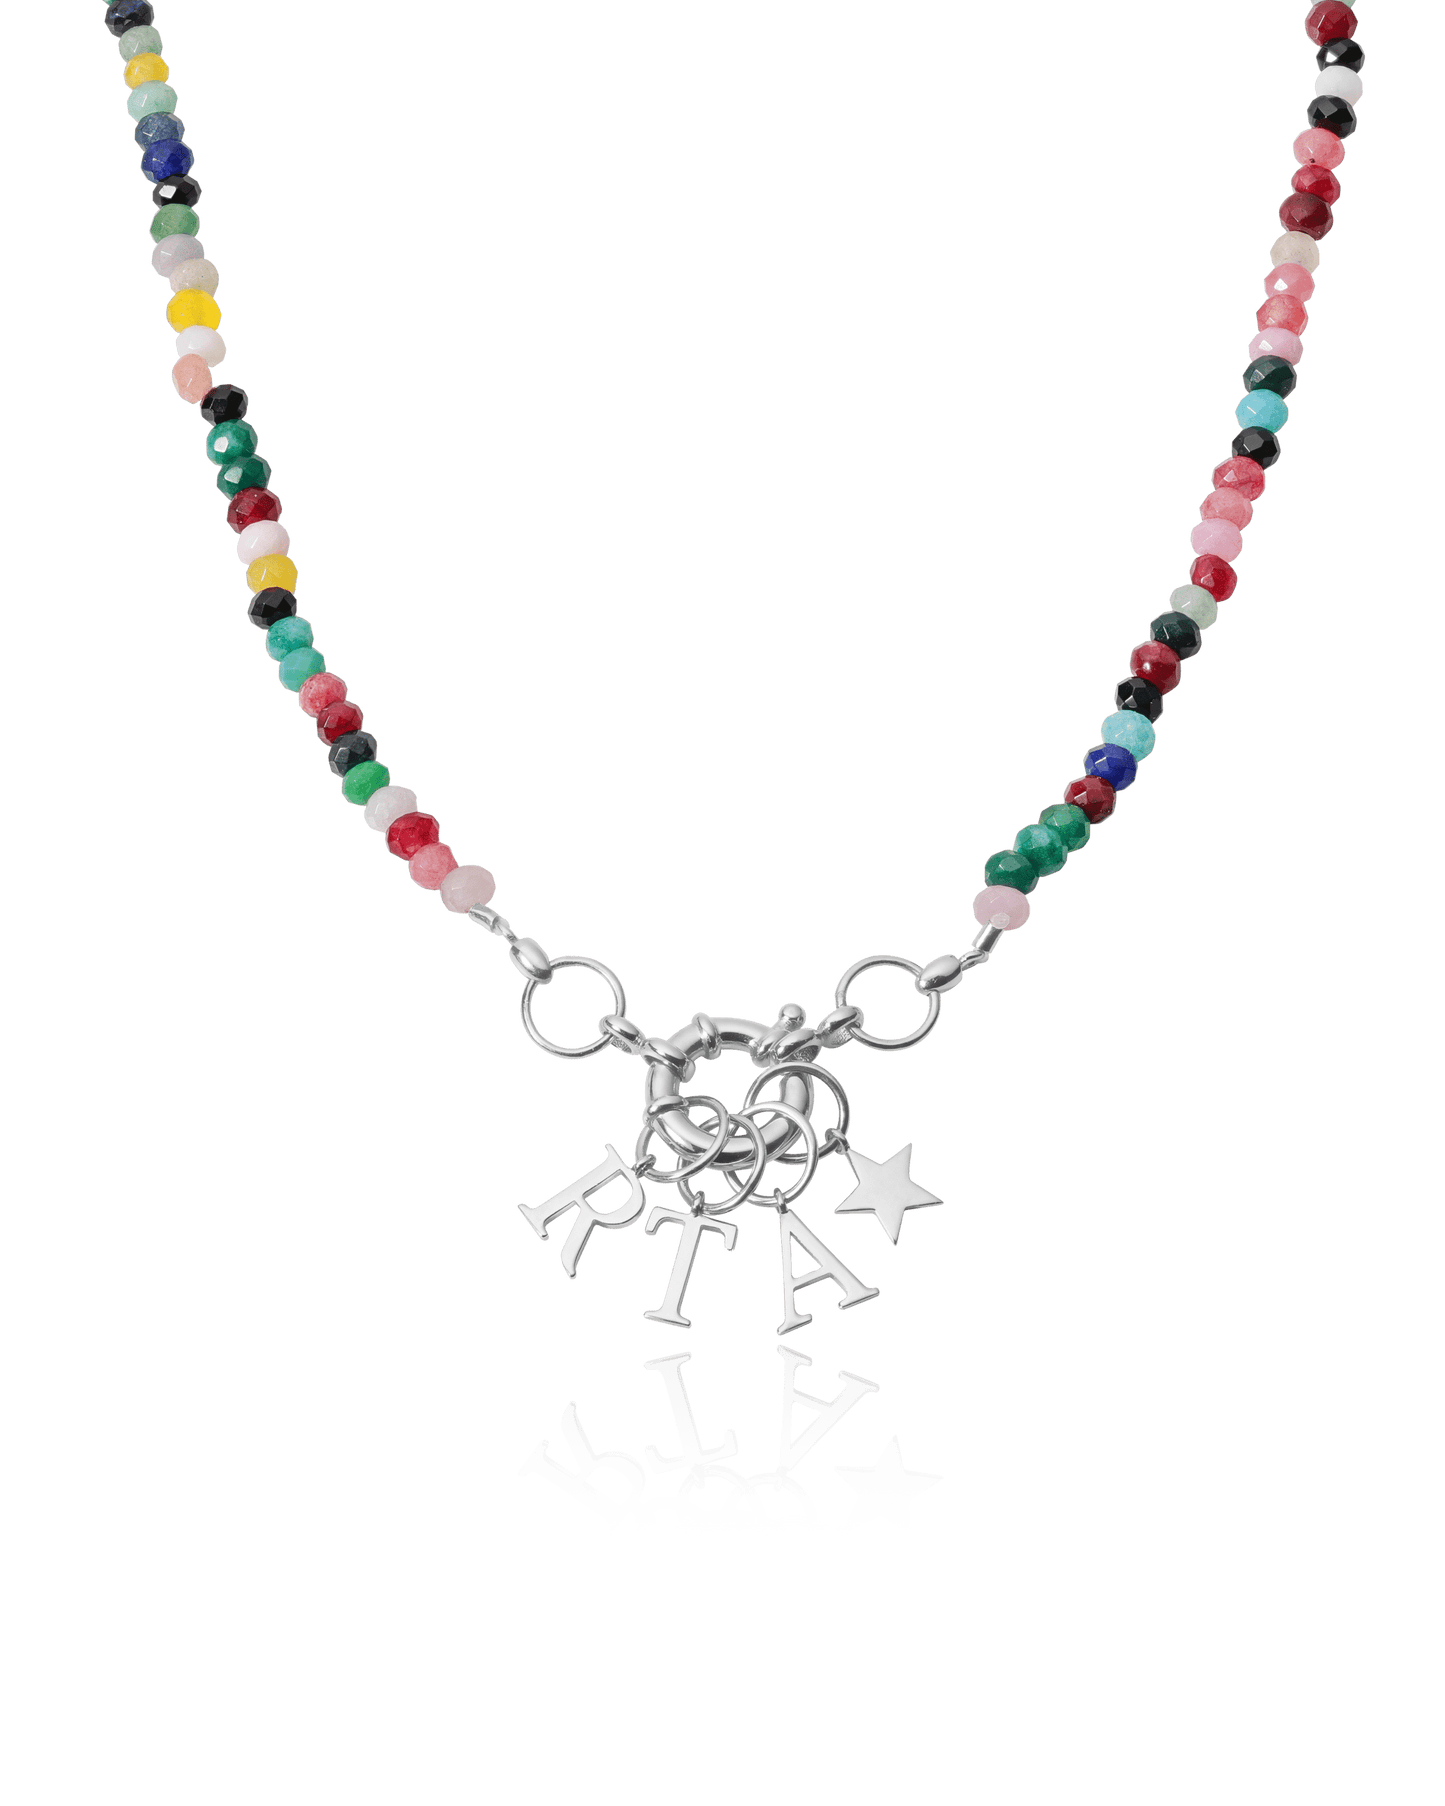 Watermelon Charm Lock Necklace - 925 Sterling Silver Necklaces magal-dev Colorful Jade Gemstones 1 Charm 16"